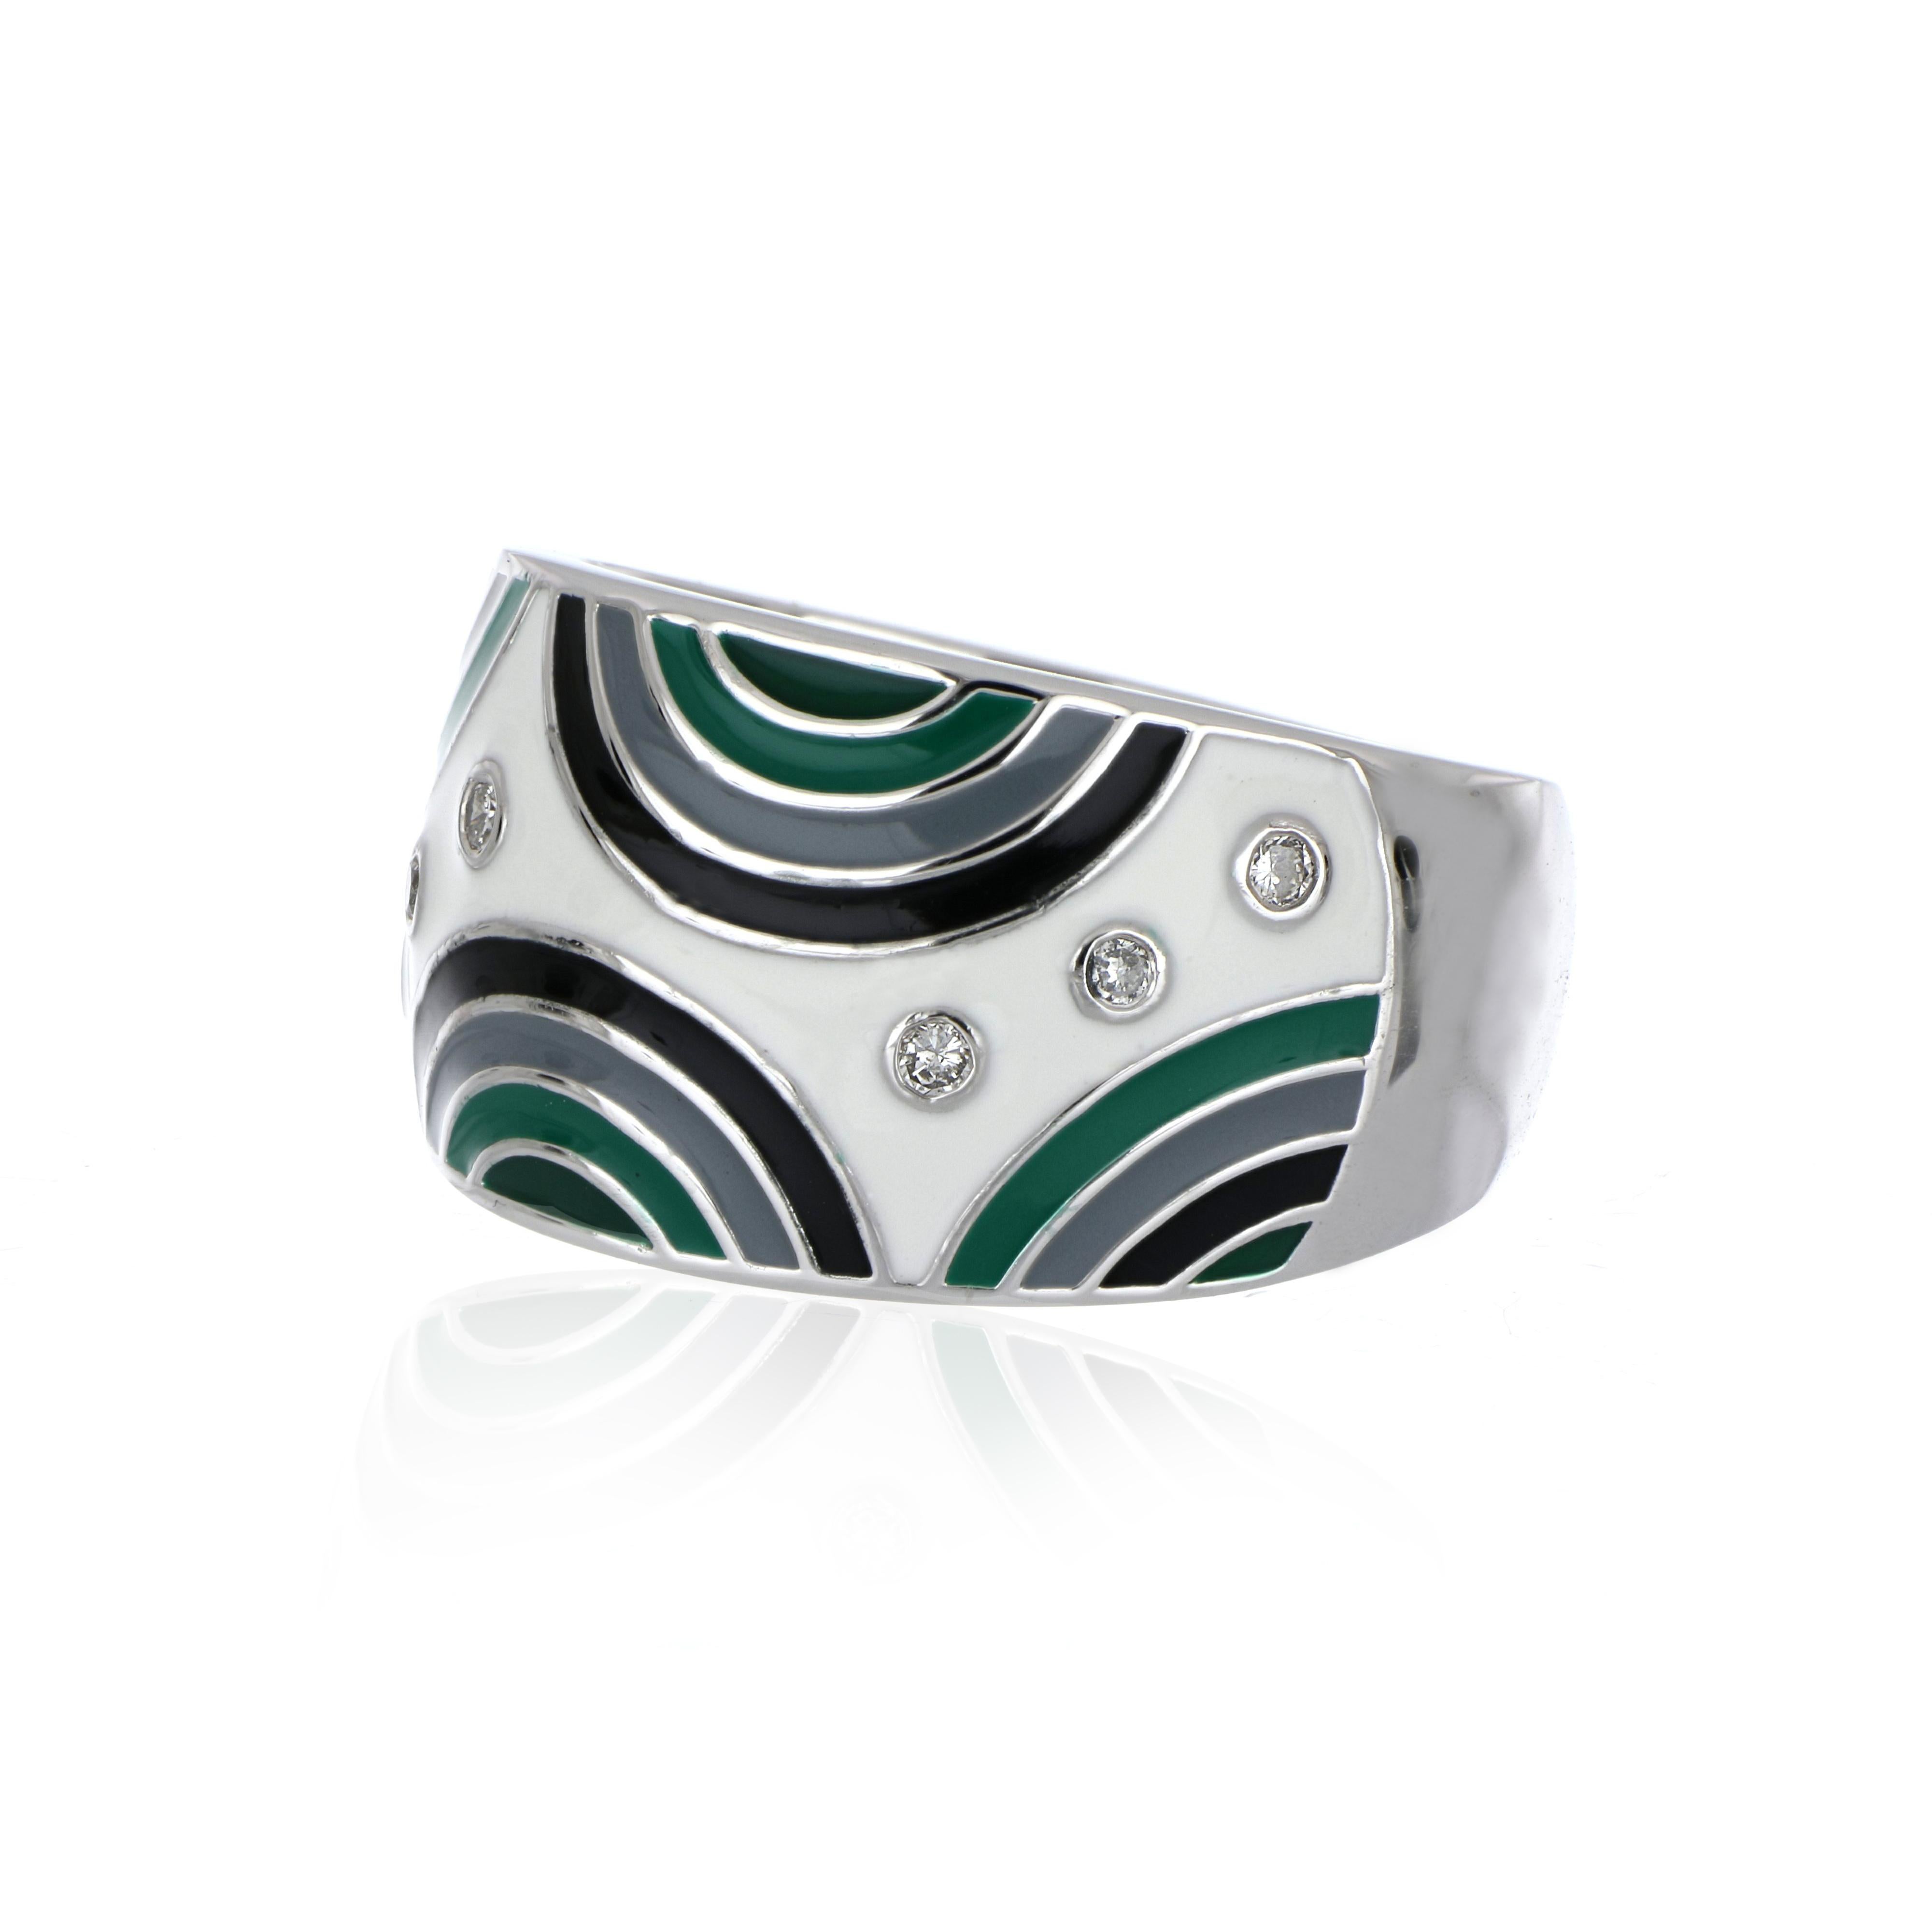 Elegant and exquisite Multi Colored Enamel Cocktail 14 K Ring, accented with Diamonds, weighing approx. 0.13 cts. Beautifully Hand crafted in 14 Karat White Gold.


Diamonds: GH-SI 

Approx. Wt.: 0.13 Cts.

Ring Size: US 7 Free Customizable On